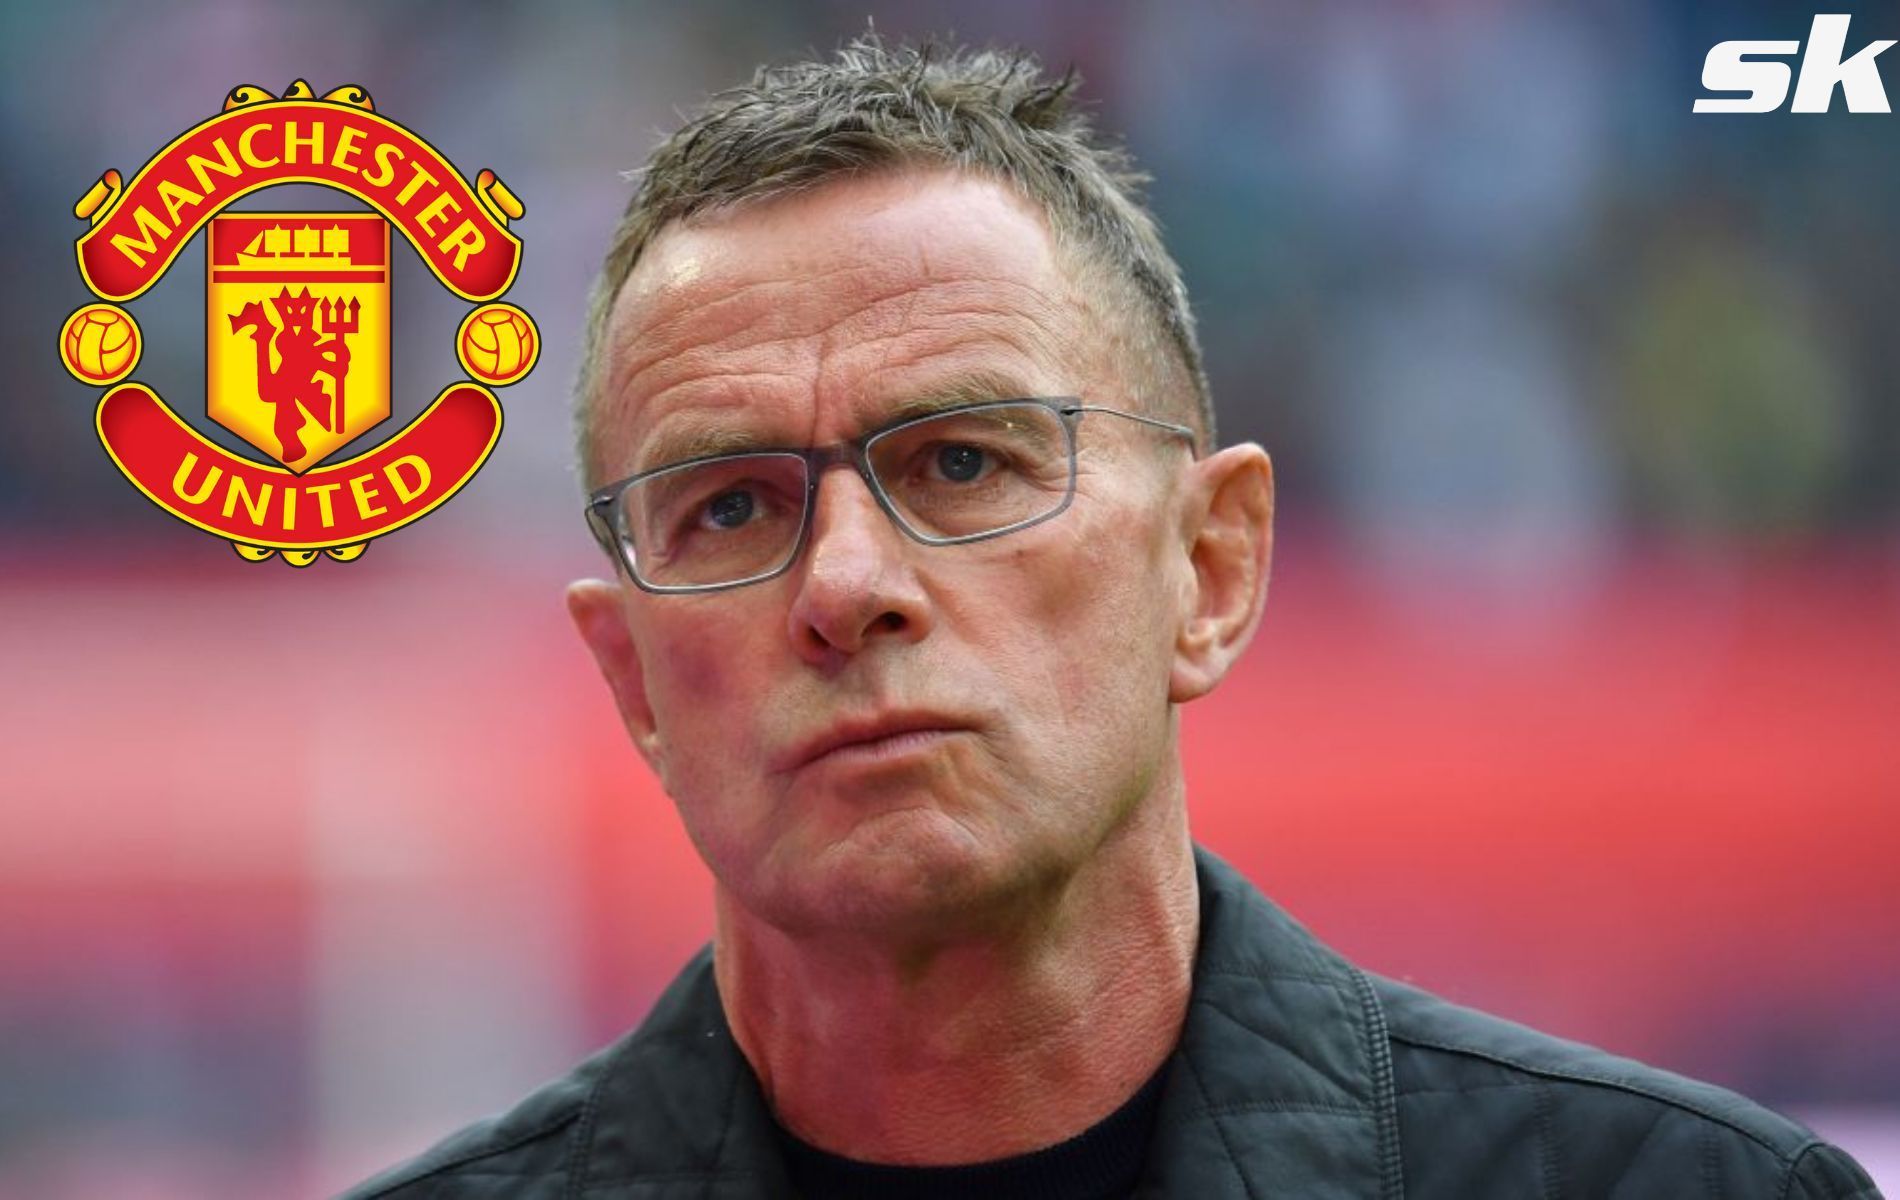 Ralf Rangnick is expected to make Manchester United tactically sound